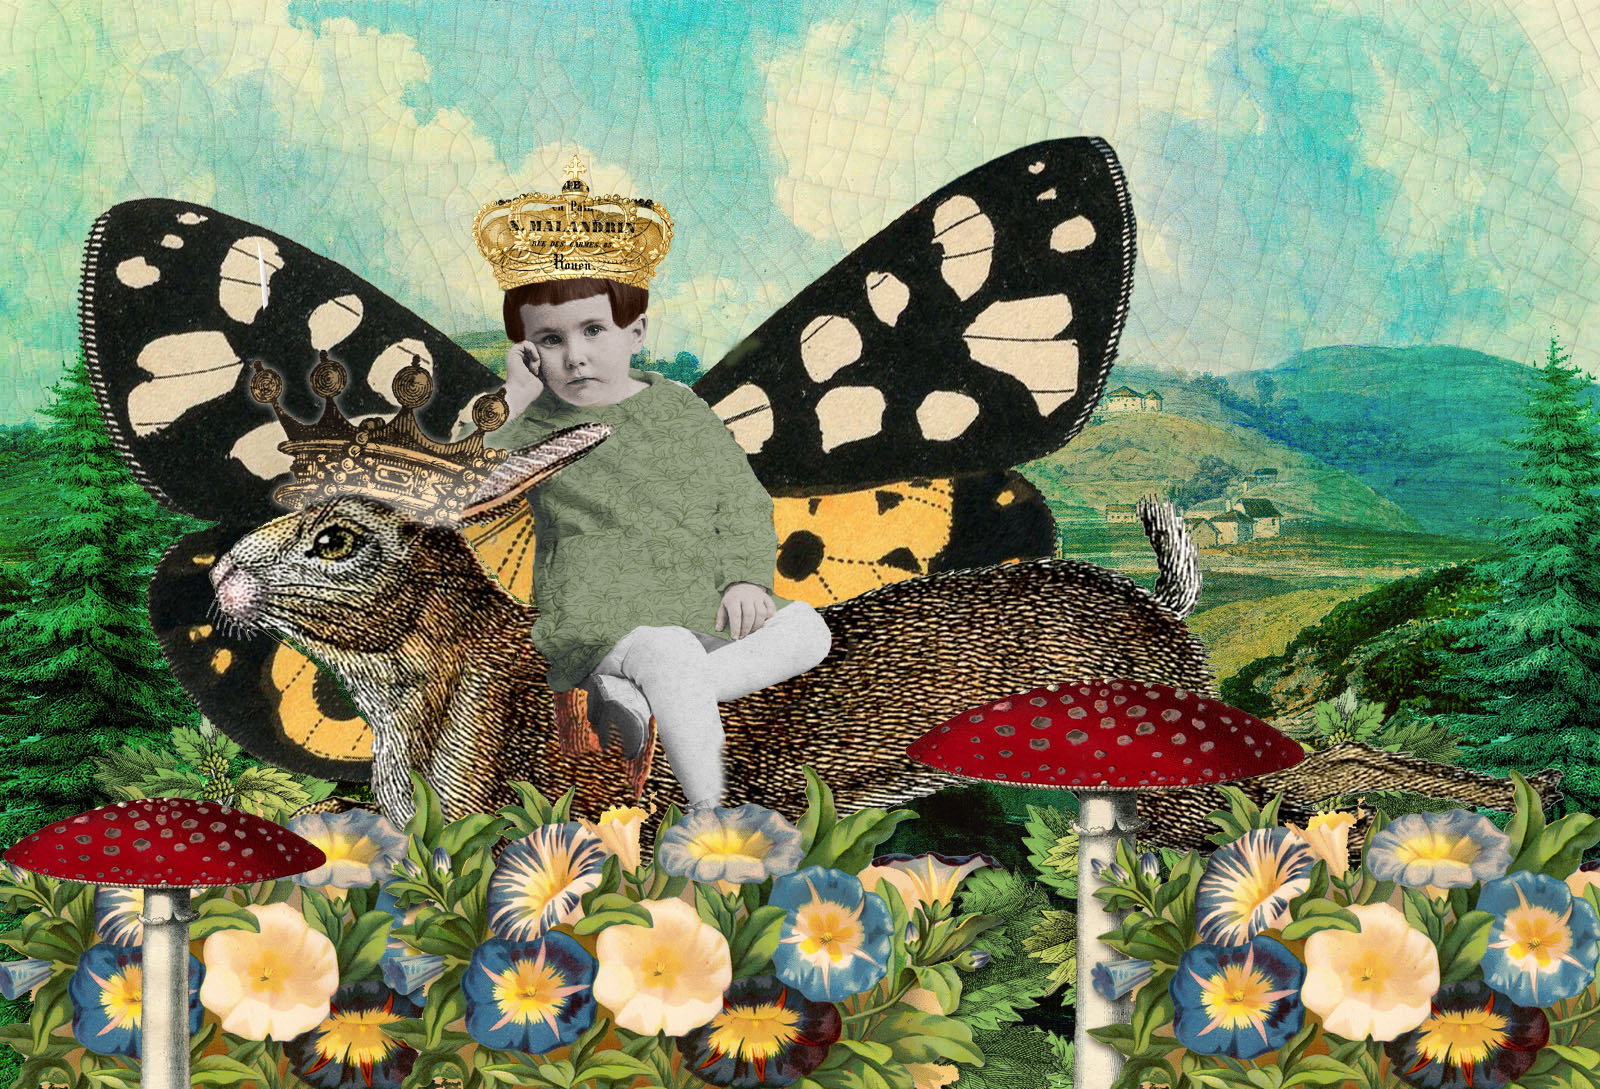 Rabbit King Collage - extracting images, coloring B&W images, masks, layer styles